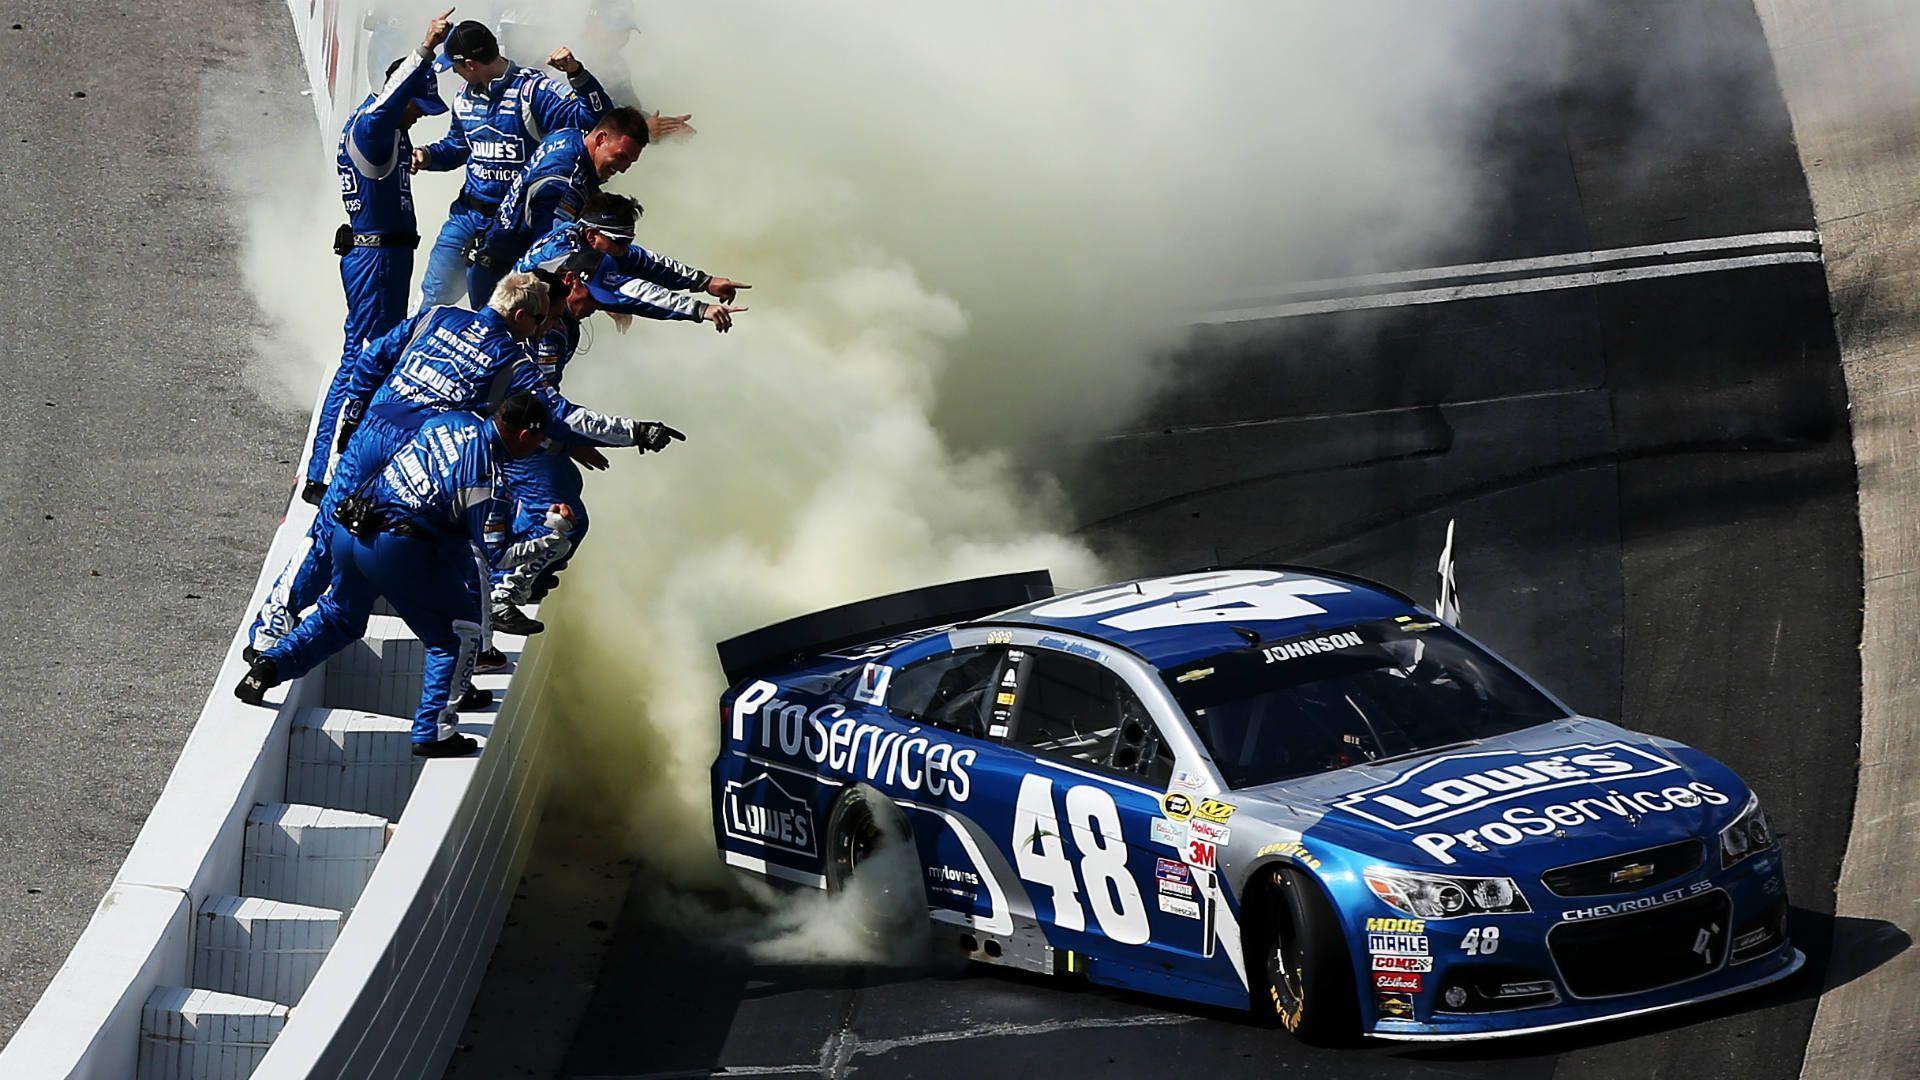 Jimmie Johnson paces himself to 10th win at Dover